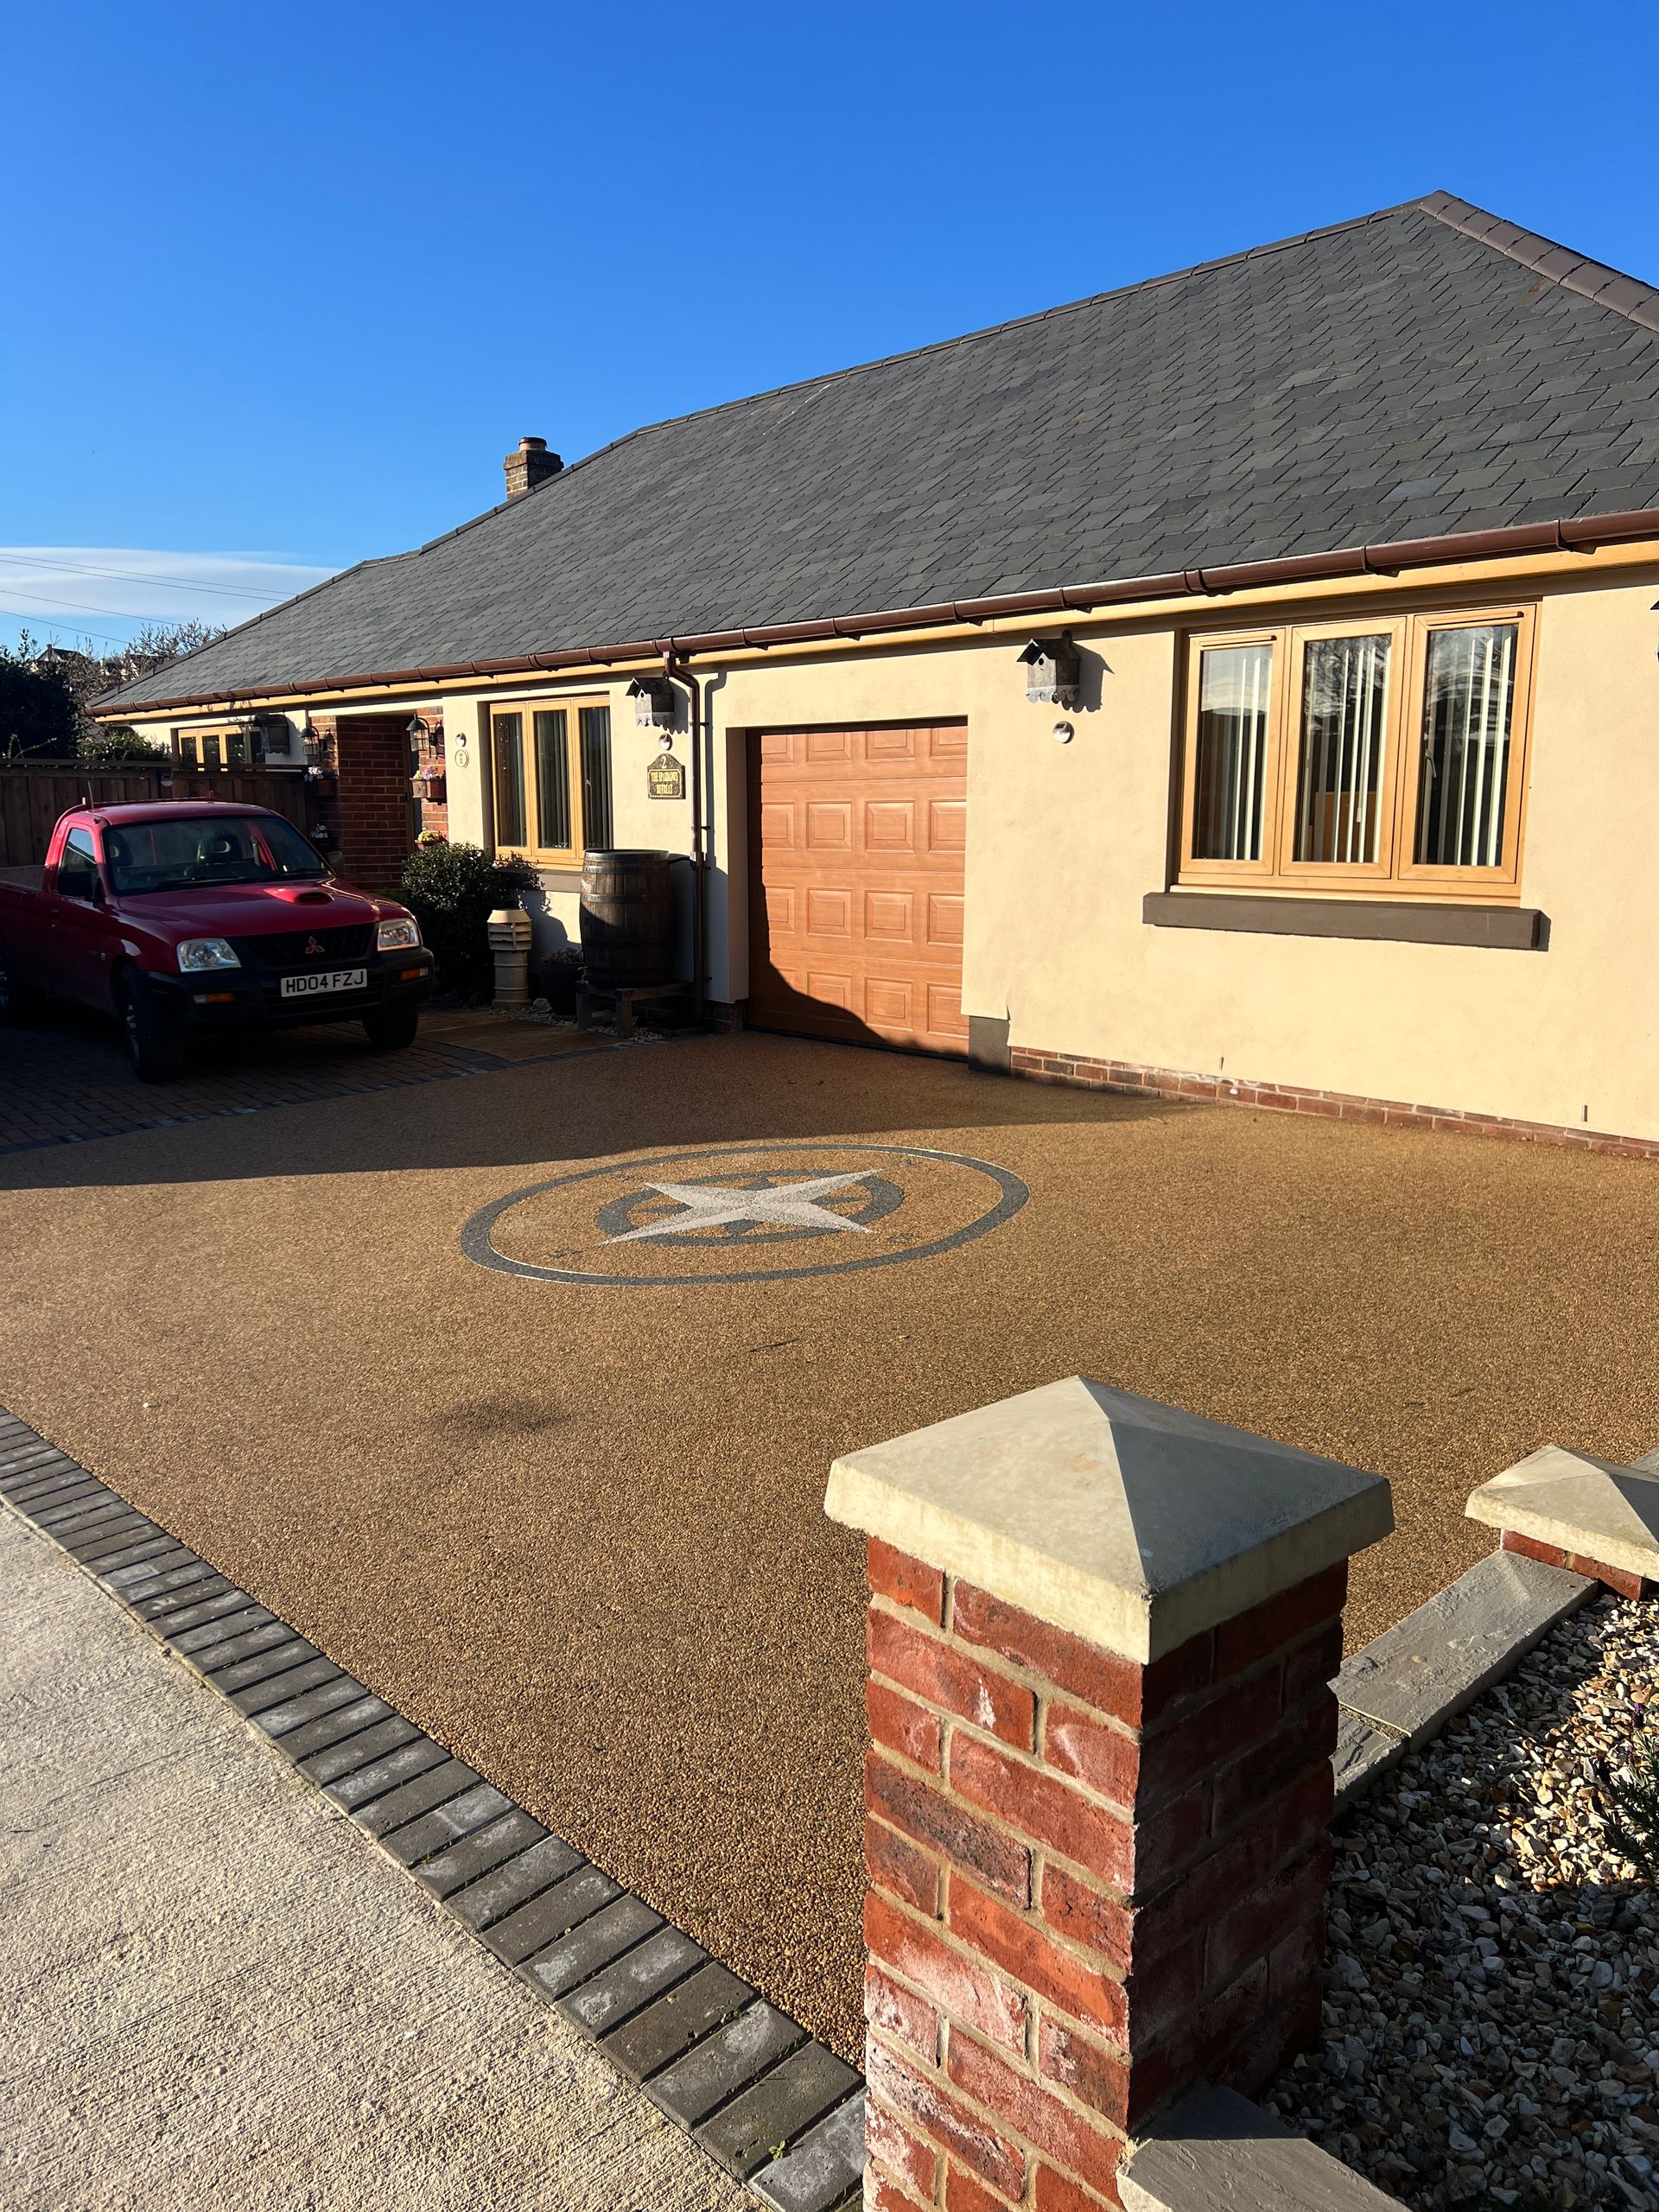 Brown resin driveway with a resin compass pattern on it, outside a cream bungalow with garage.